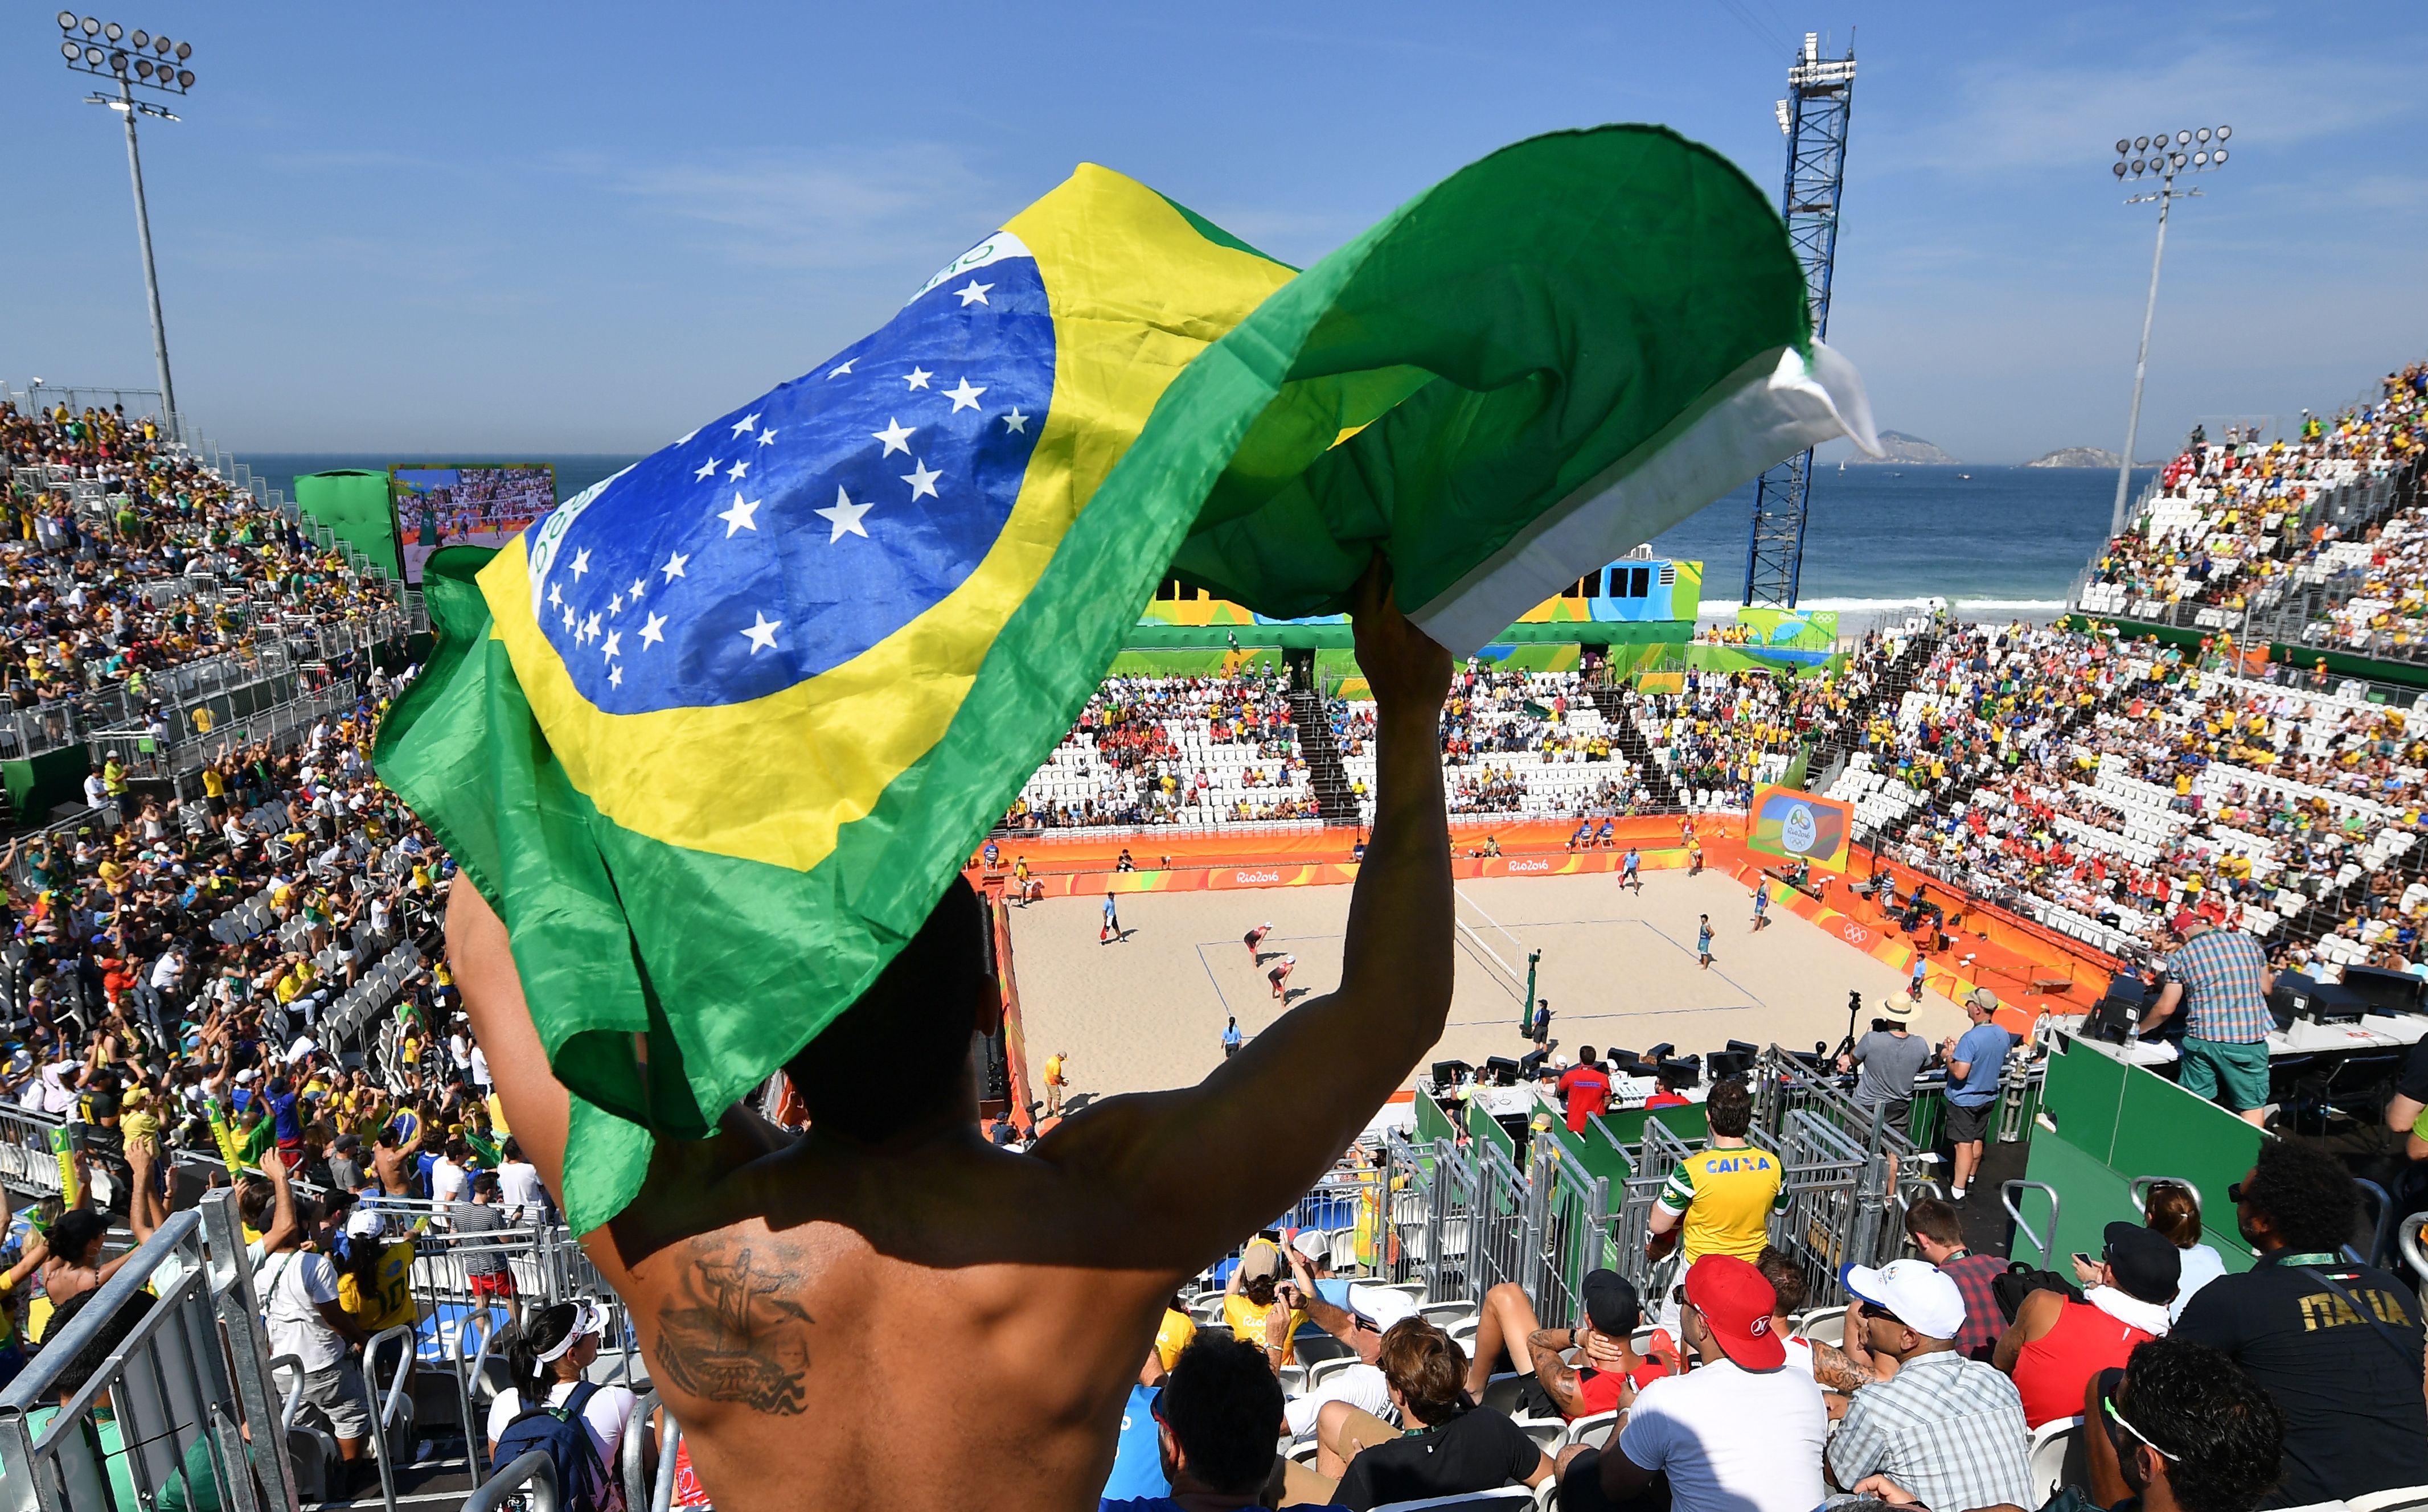 The women's beach volleyball qualifying match between Spain and Argentina at the Beach Volley Arena in Rio de Janeiro on Aug. 6, 2016. (Leon Neal—AFP/Getty Images)